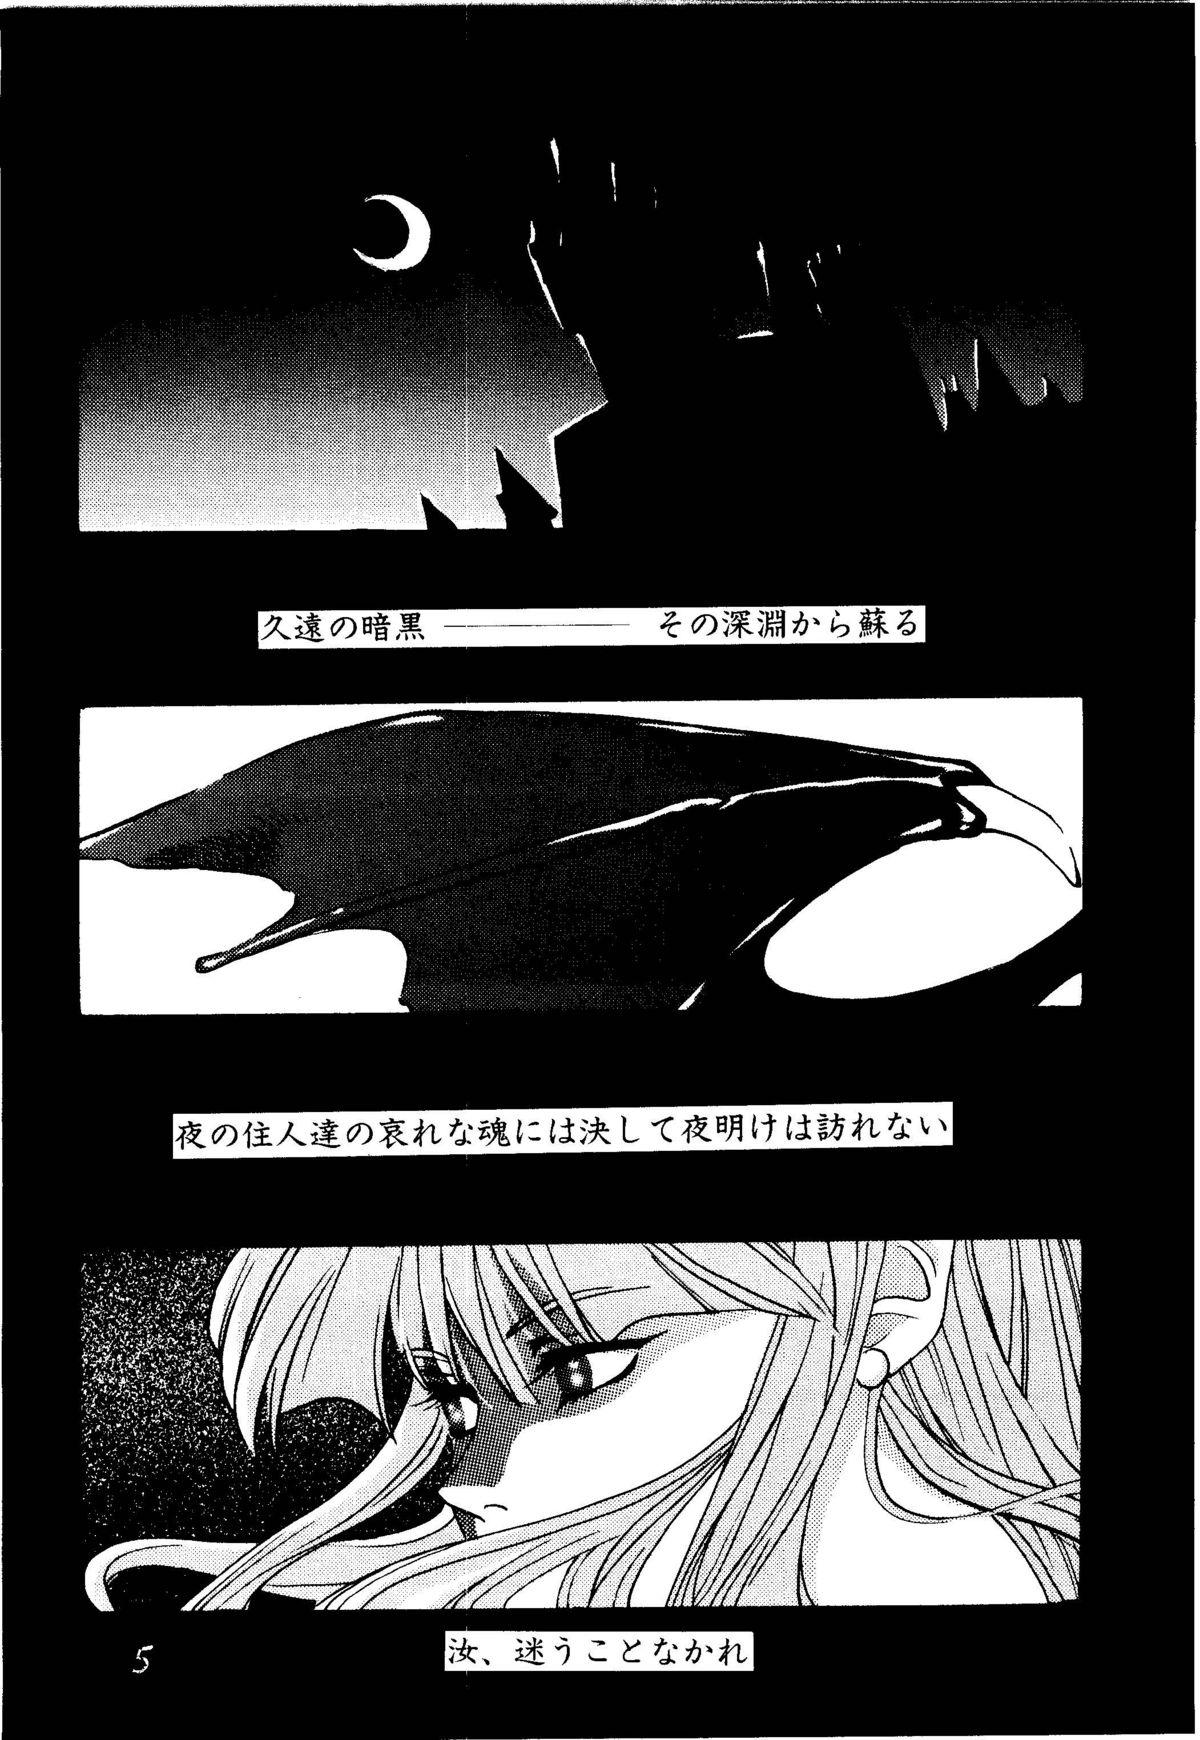 Missionary Fire and Ice - Darkstalkers Fitness - Page 5